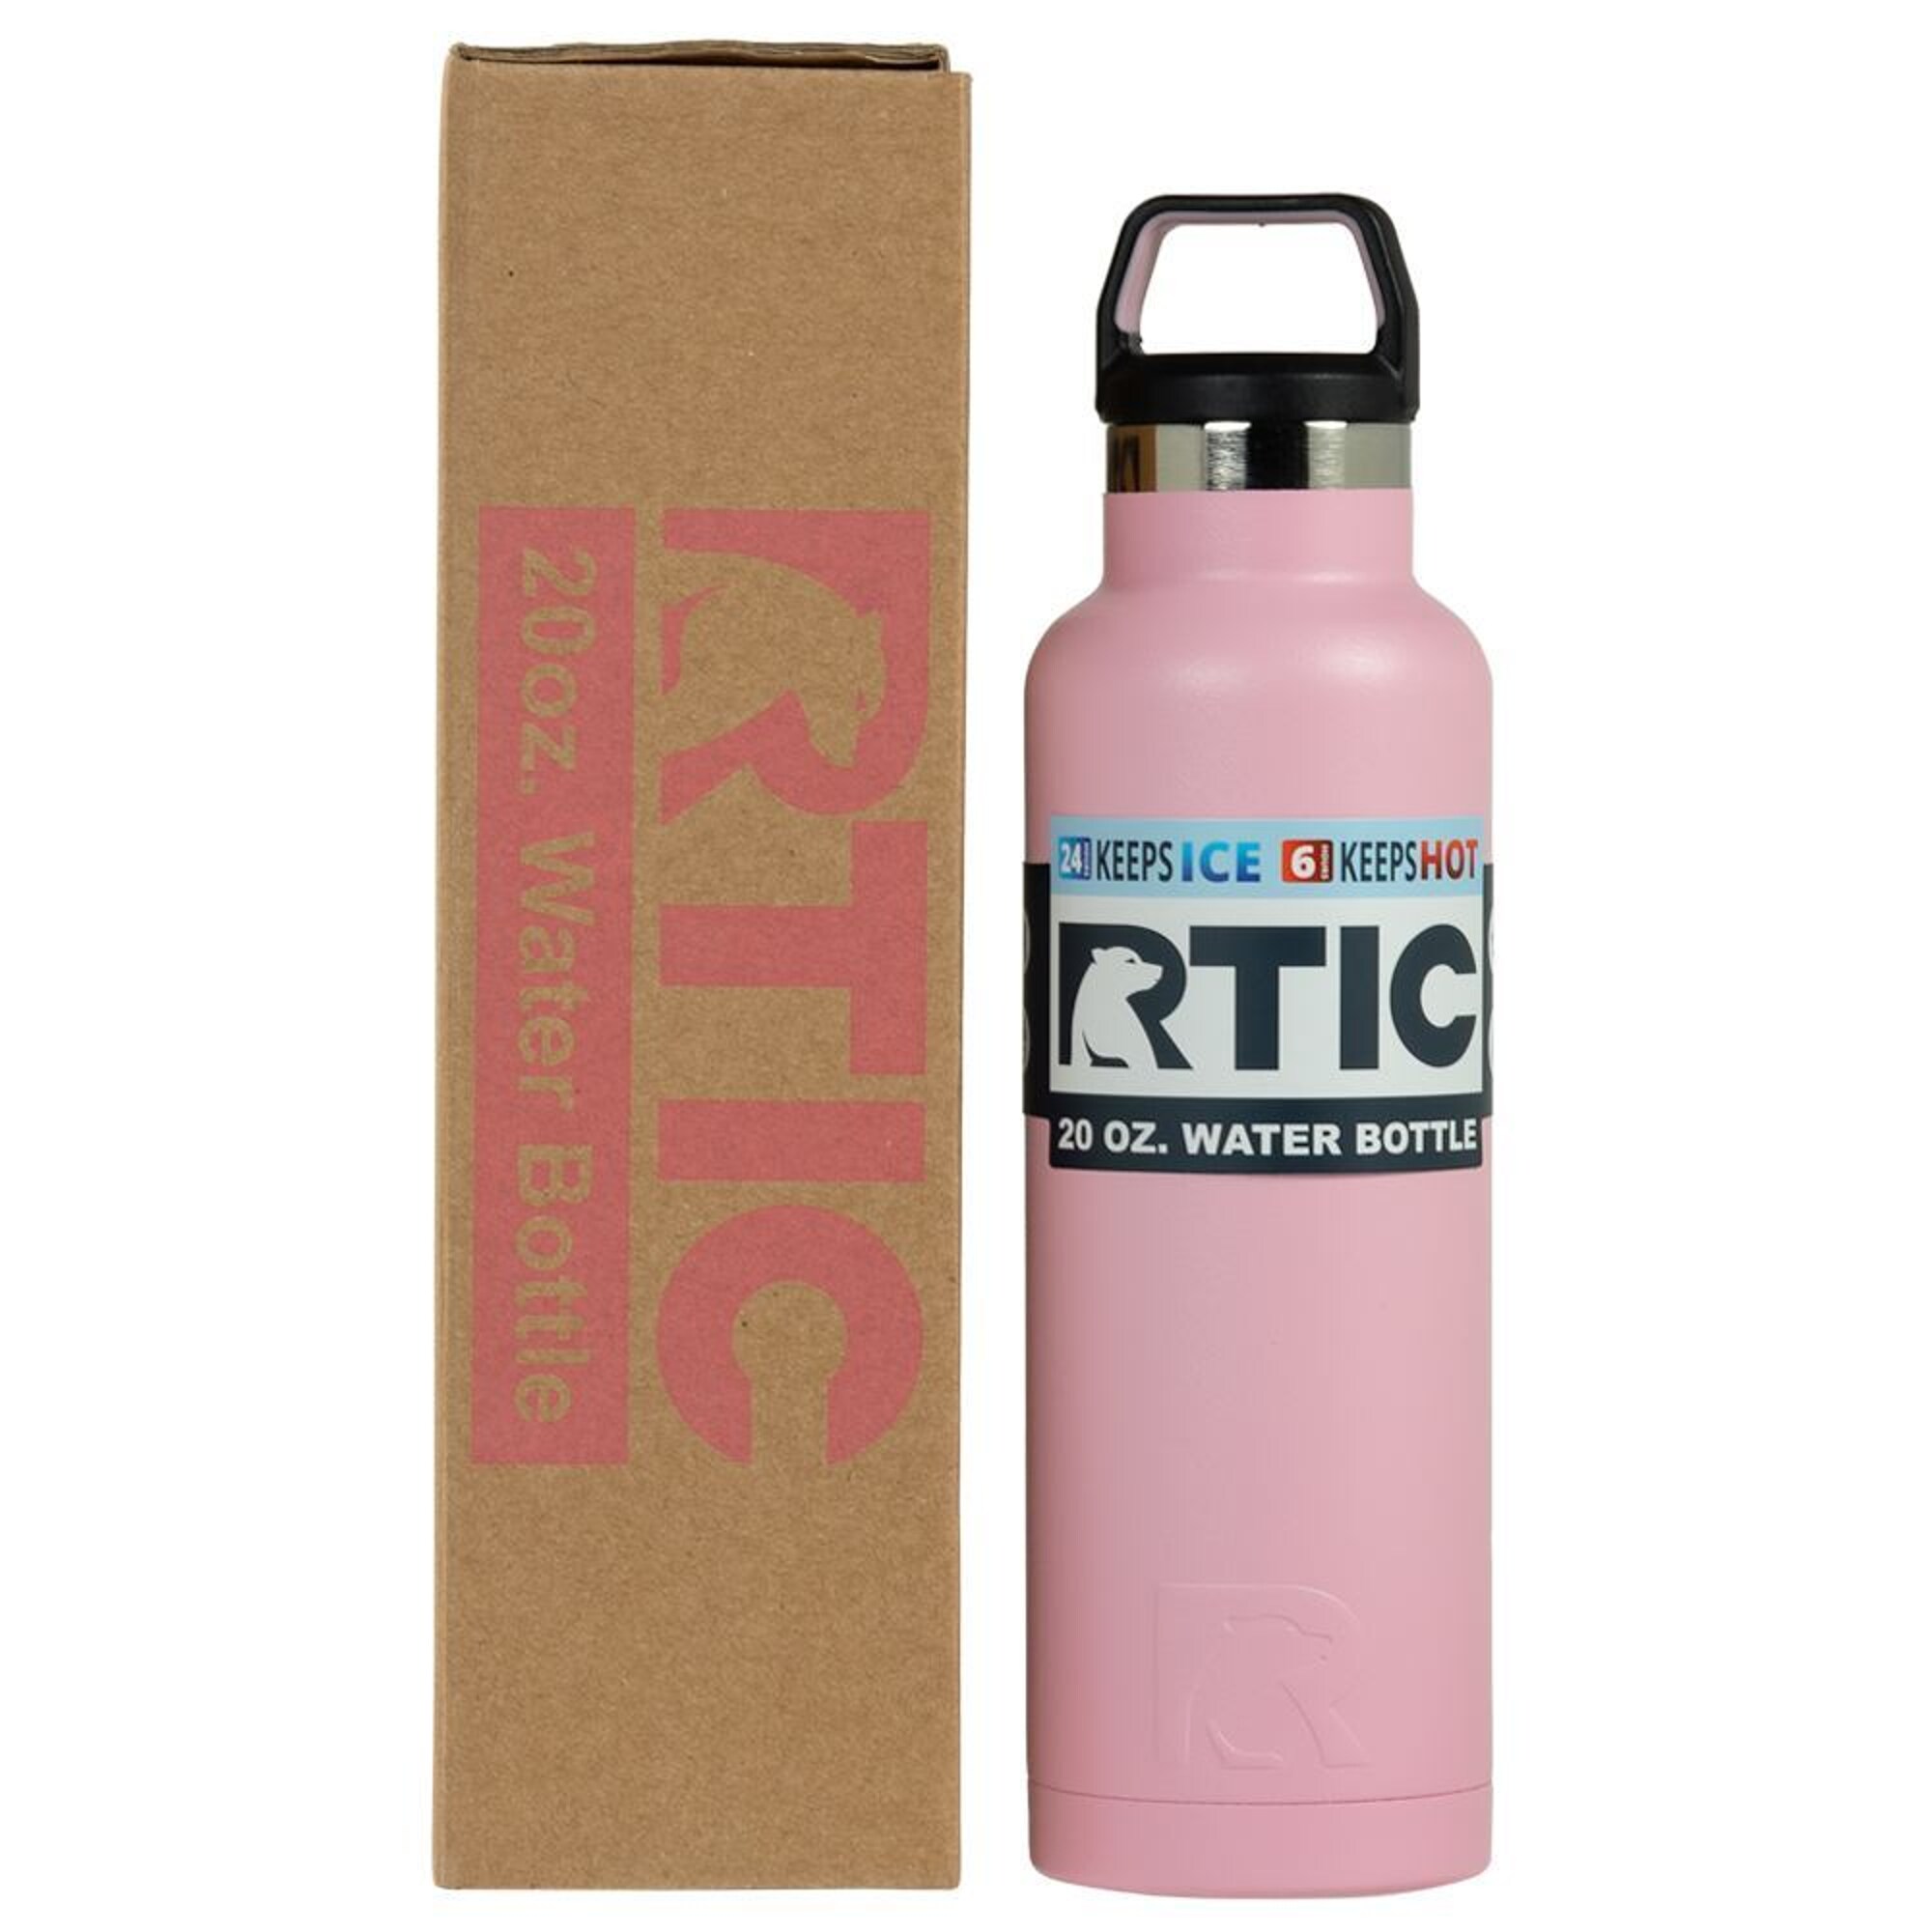 RTIC 20 oz Tumbler Hot Cold Double Wall Vacuum Insulated 20oz Matte Black  2022!